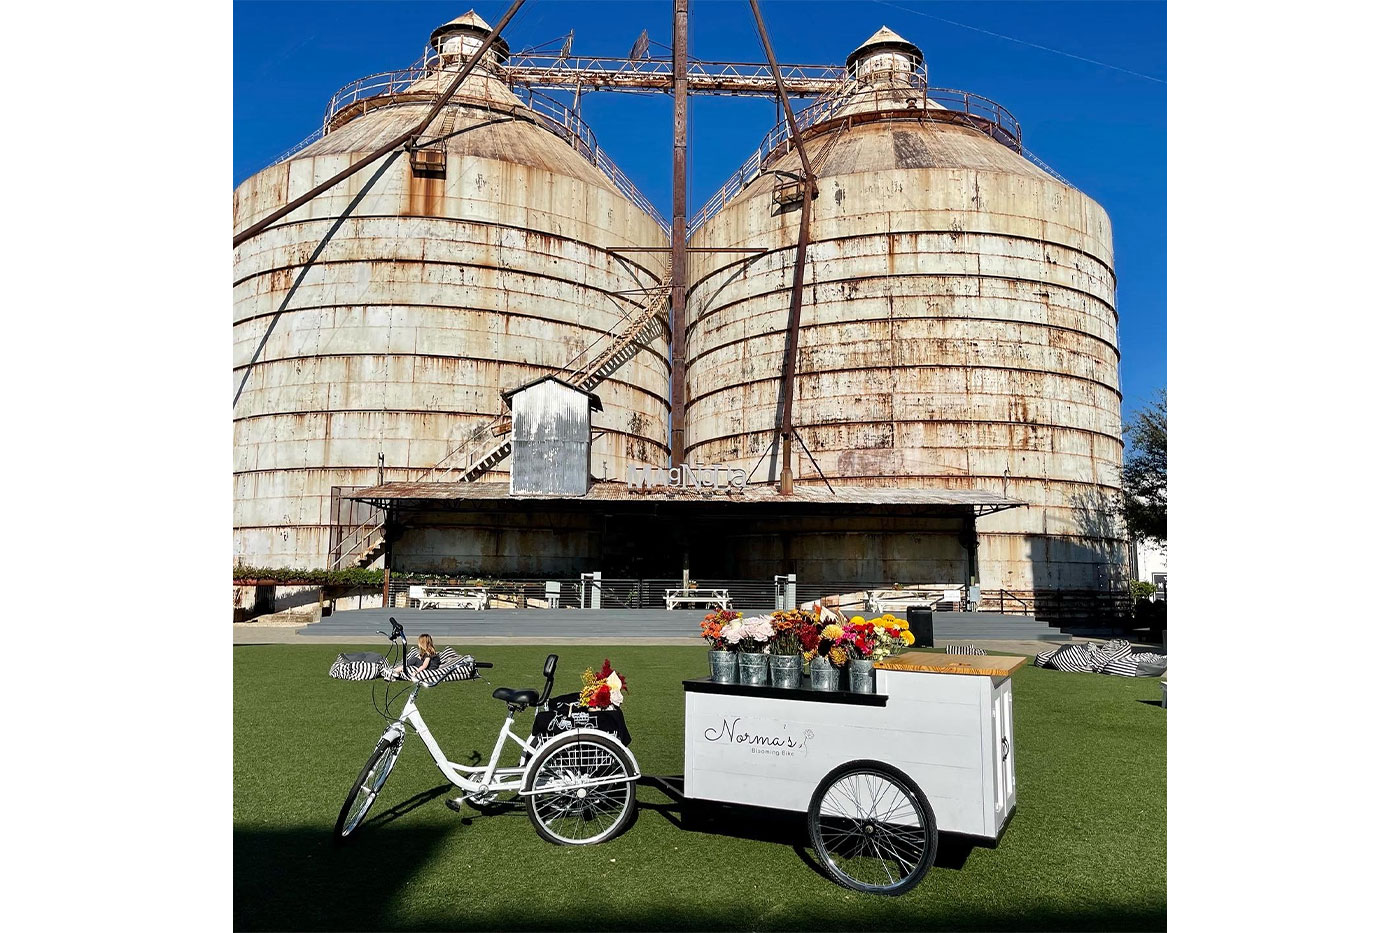 Norma's Bike in front of the Silos